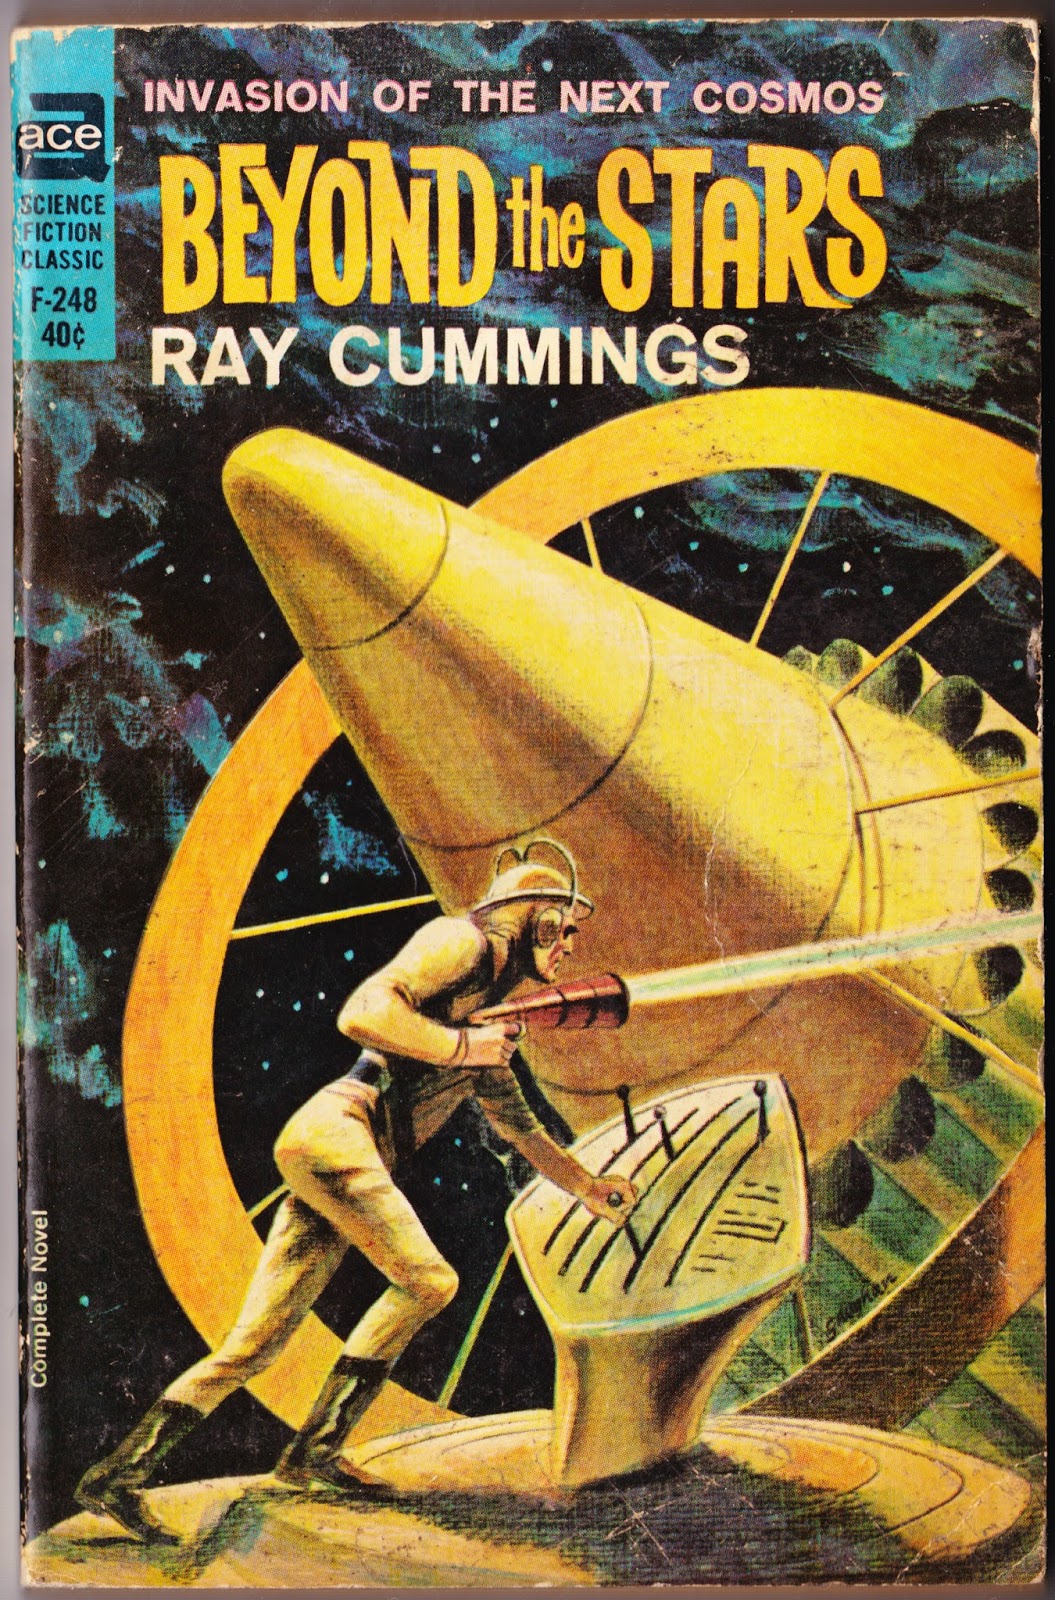 Old Sci Fi Book Covers | Hot Sex Picture